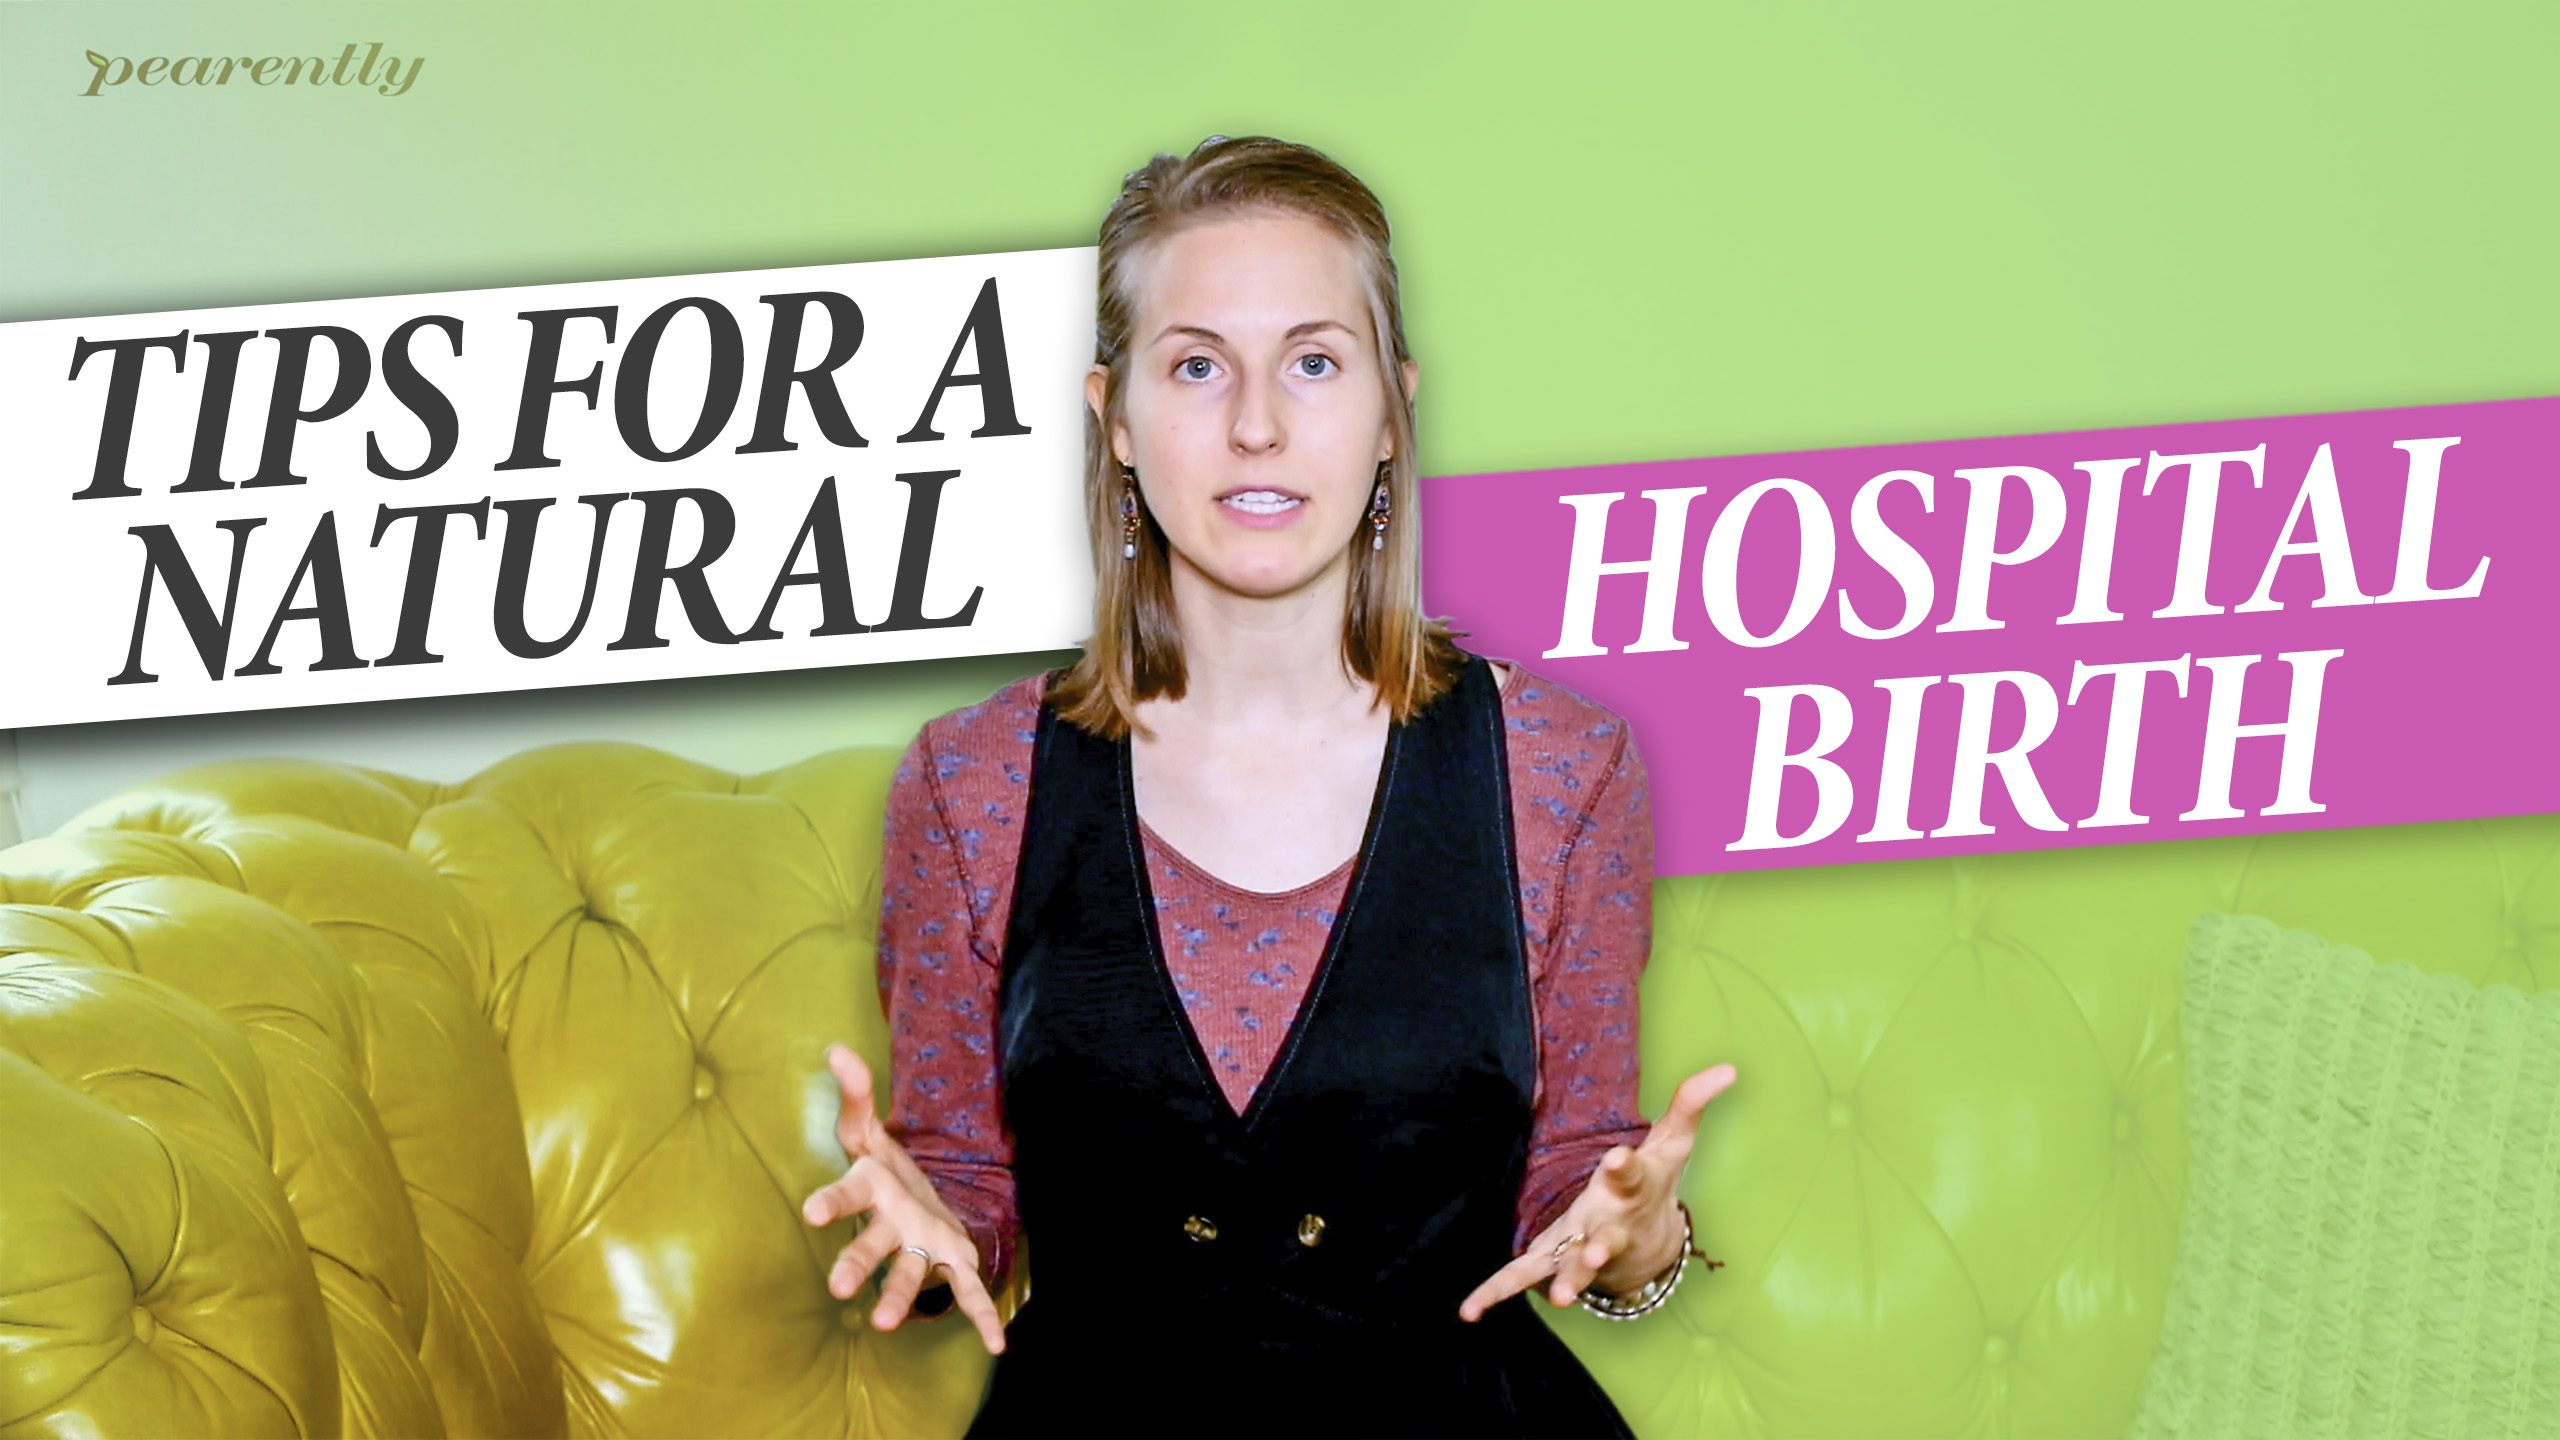 Tips for a Natural Hospital Birth